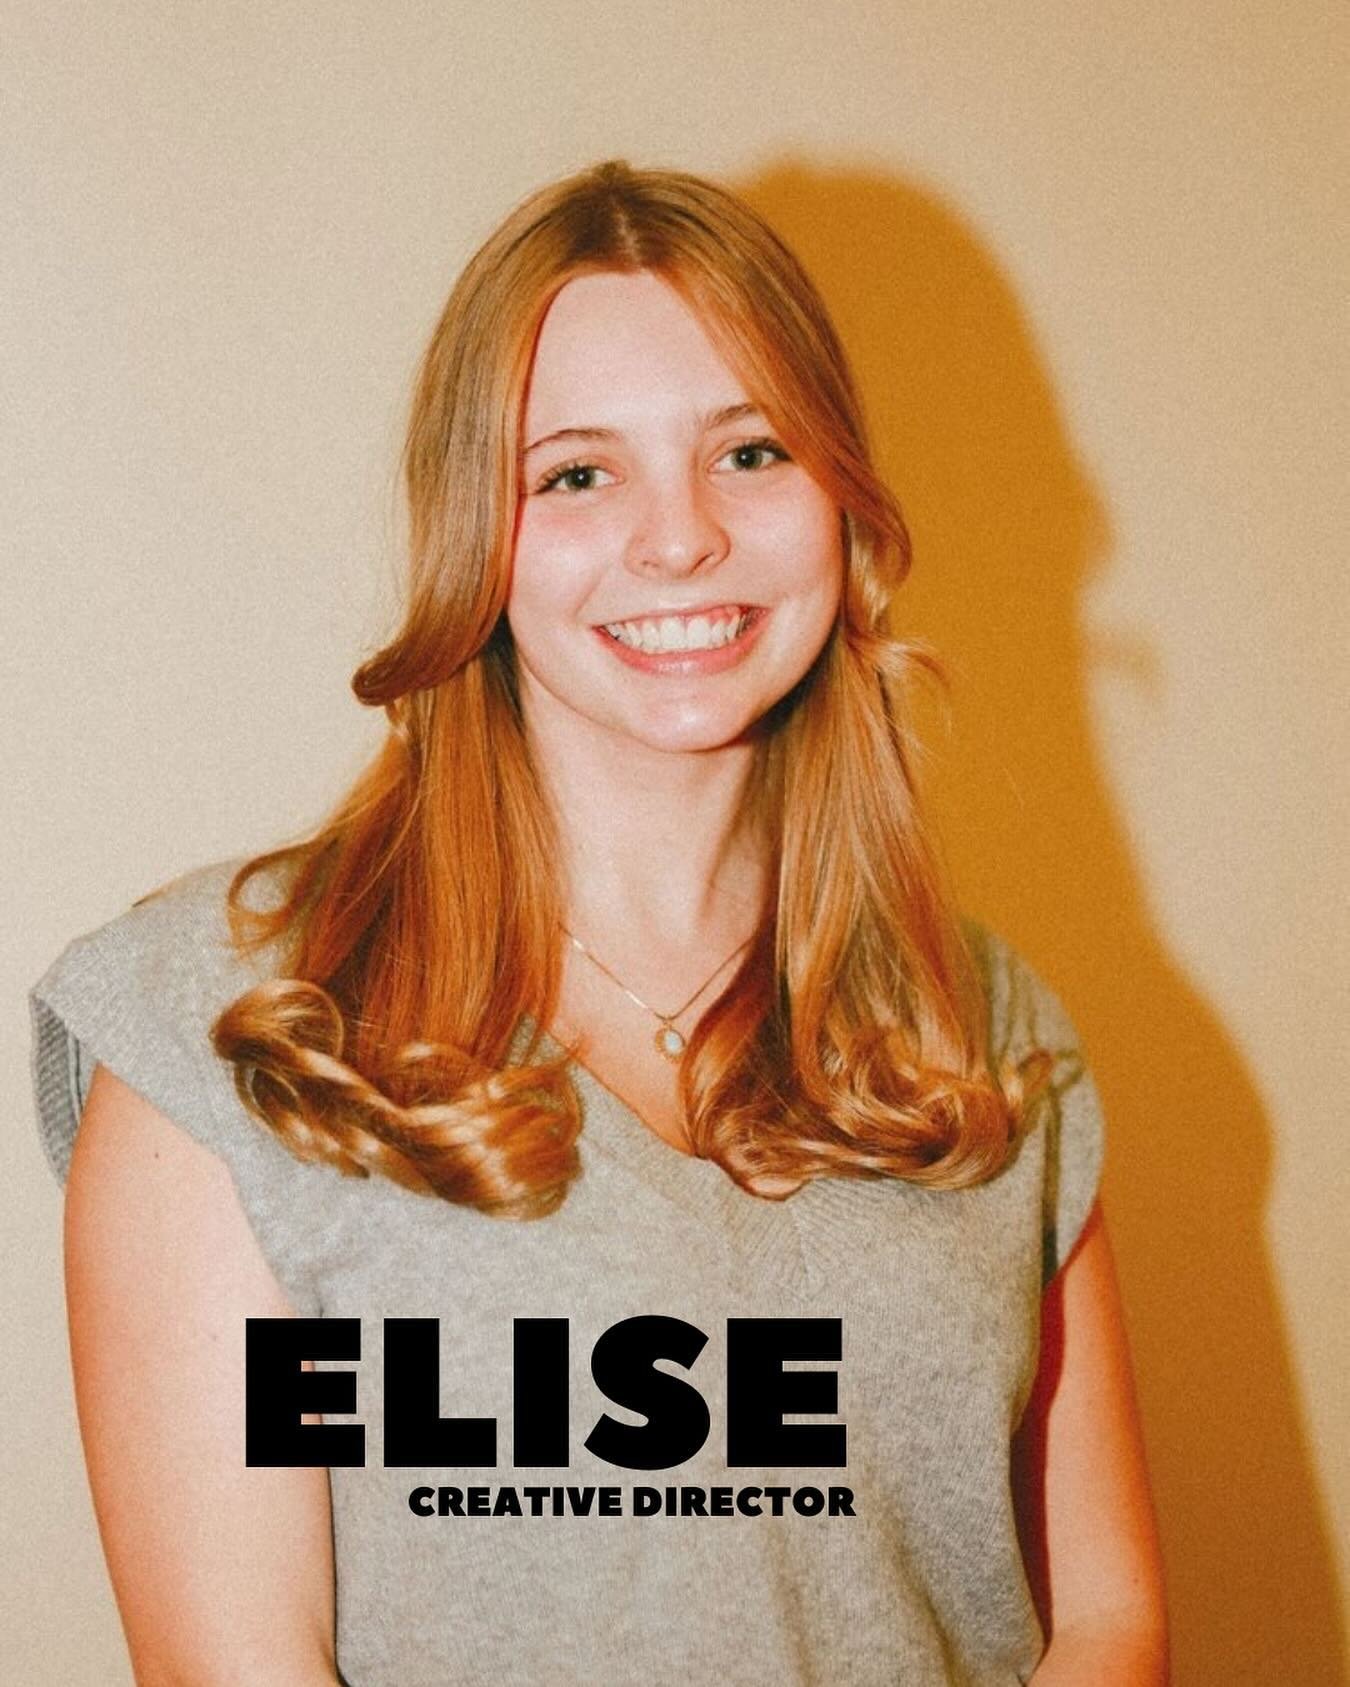 Meet Elise, Moda&rsquo;s Creative Director!

Elise is responsible for leading the creative team, overseeing all visual elements of the magazine and creating the layout for all of our issues!

Elise&rsquo;s favorite part of Moda is surrounding herself